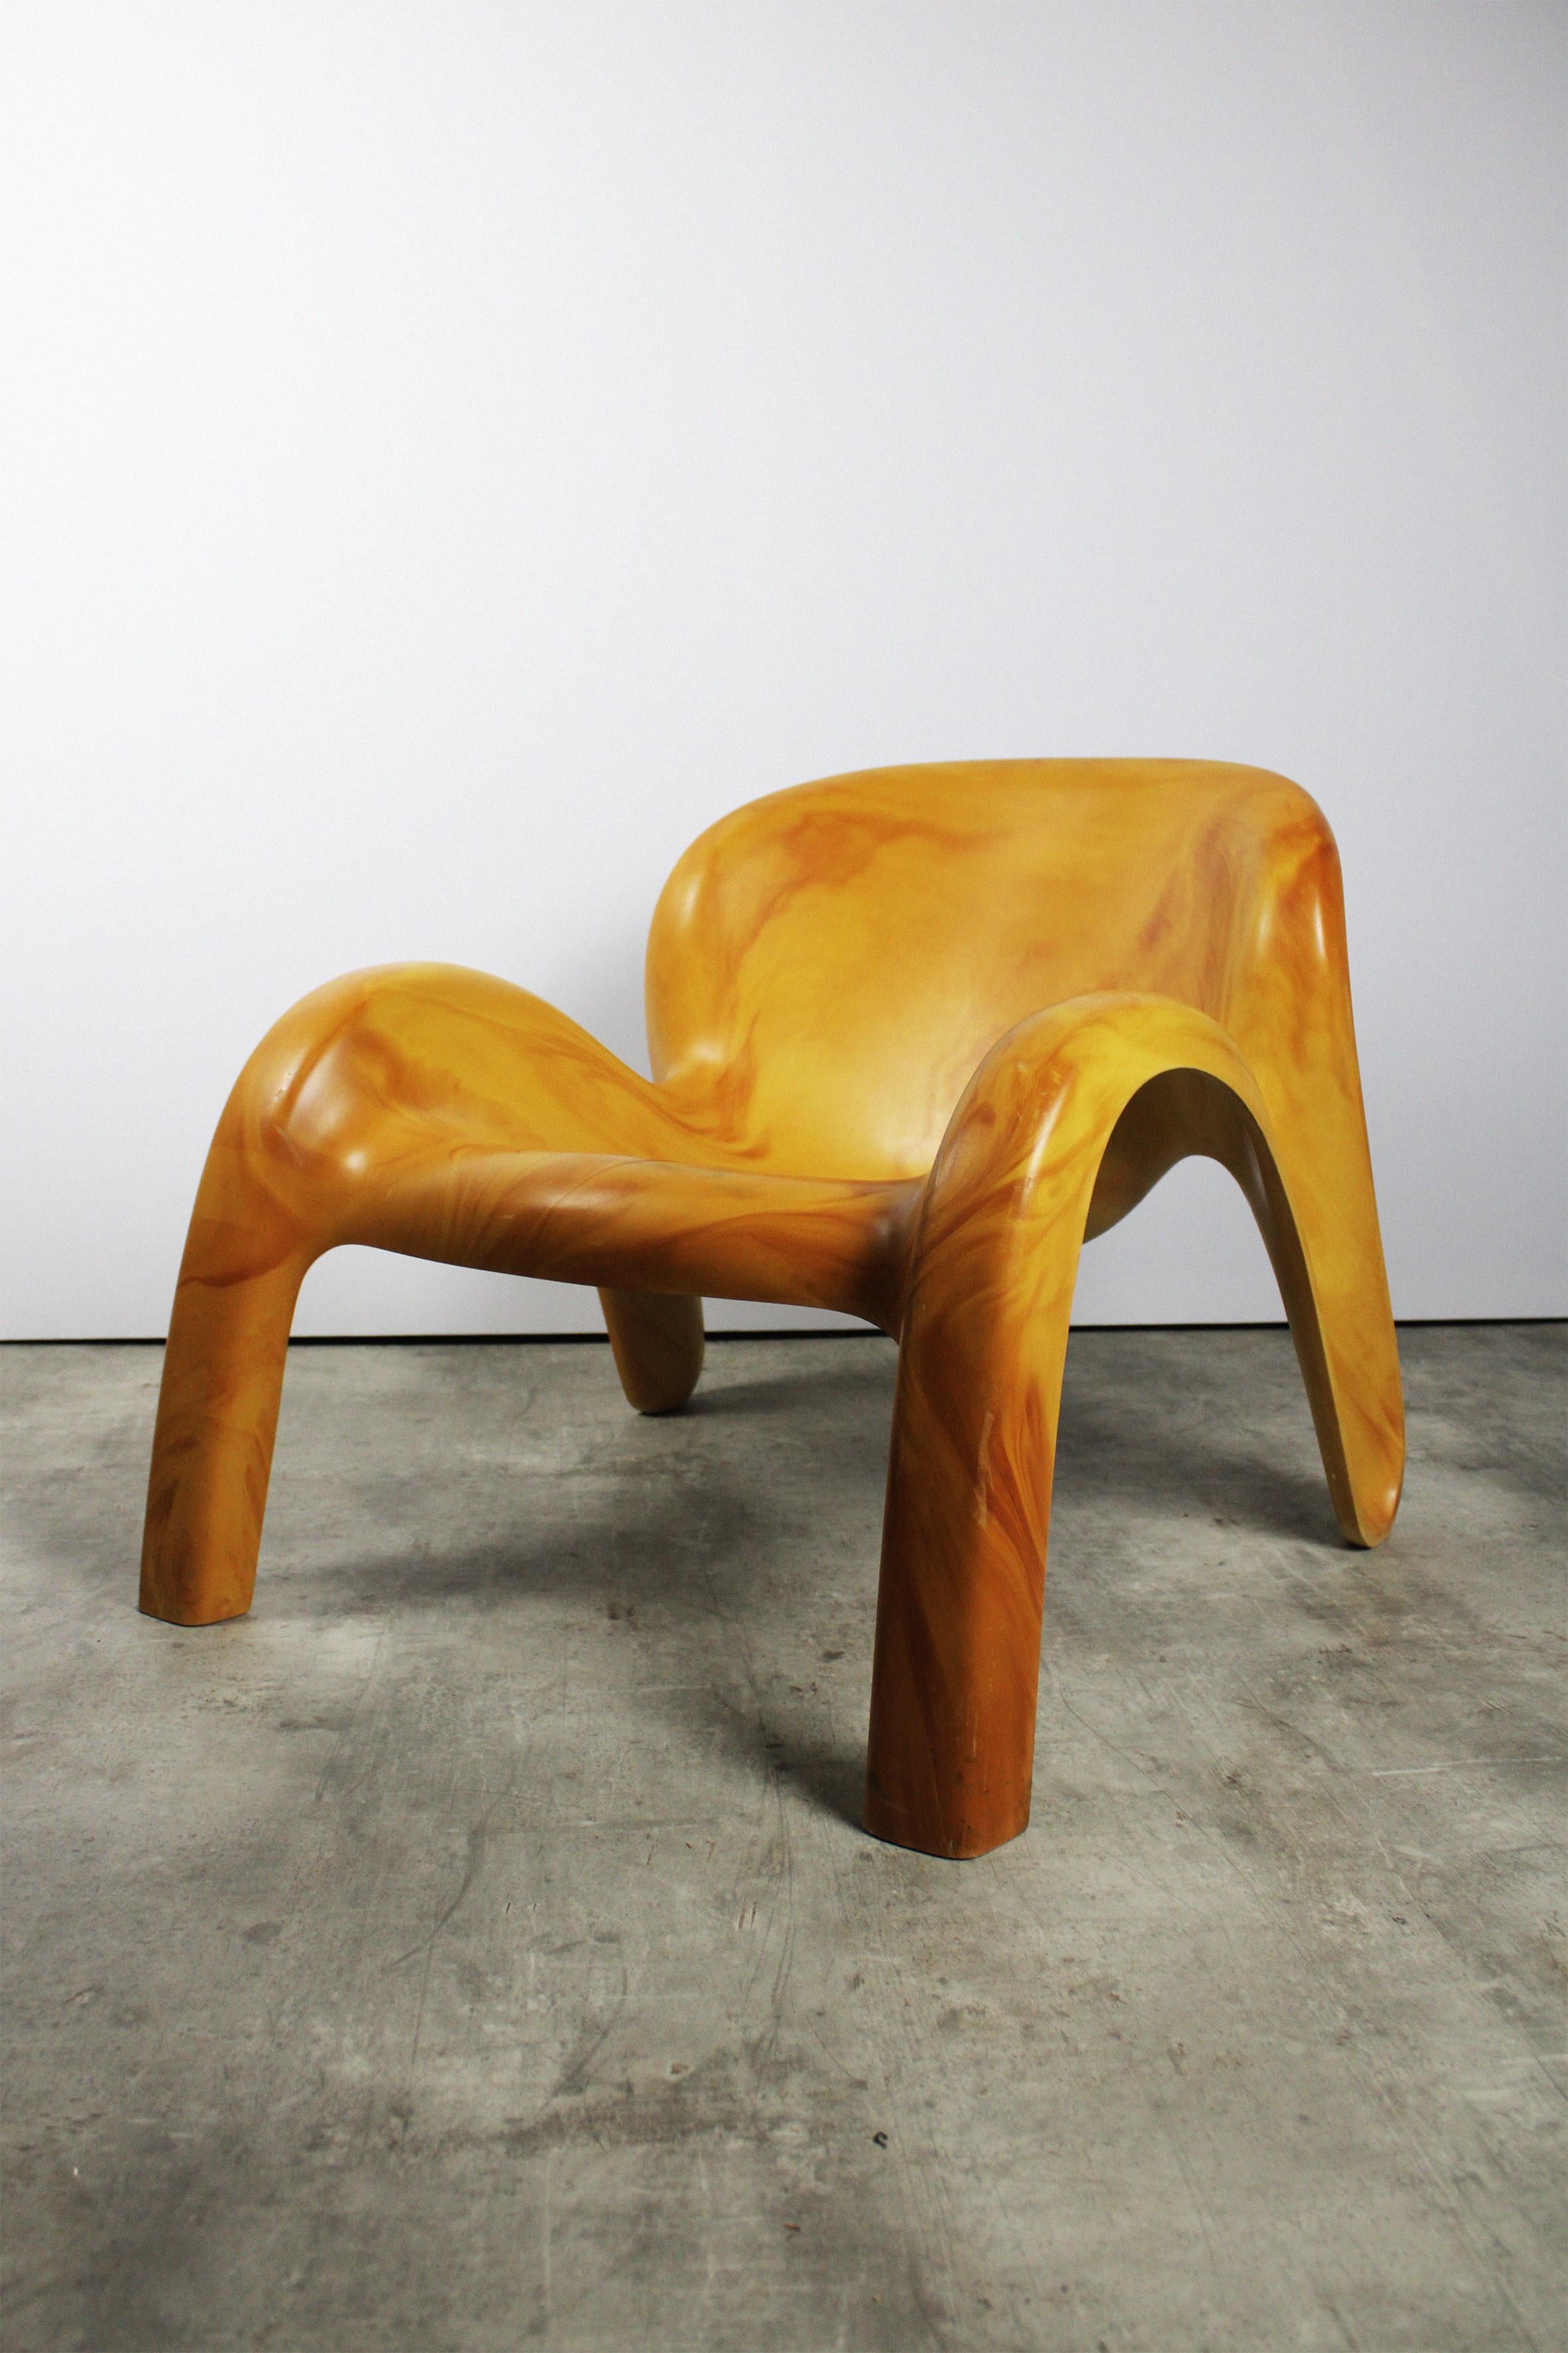 This GN2 garden chair is one of Peter Ghyczy's most acclaimed design pieces. This variant in Ochre yellow is a piece of which only a few were made and is no longer available anywhere. The chair was designed in 1970 and finally produced using only